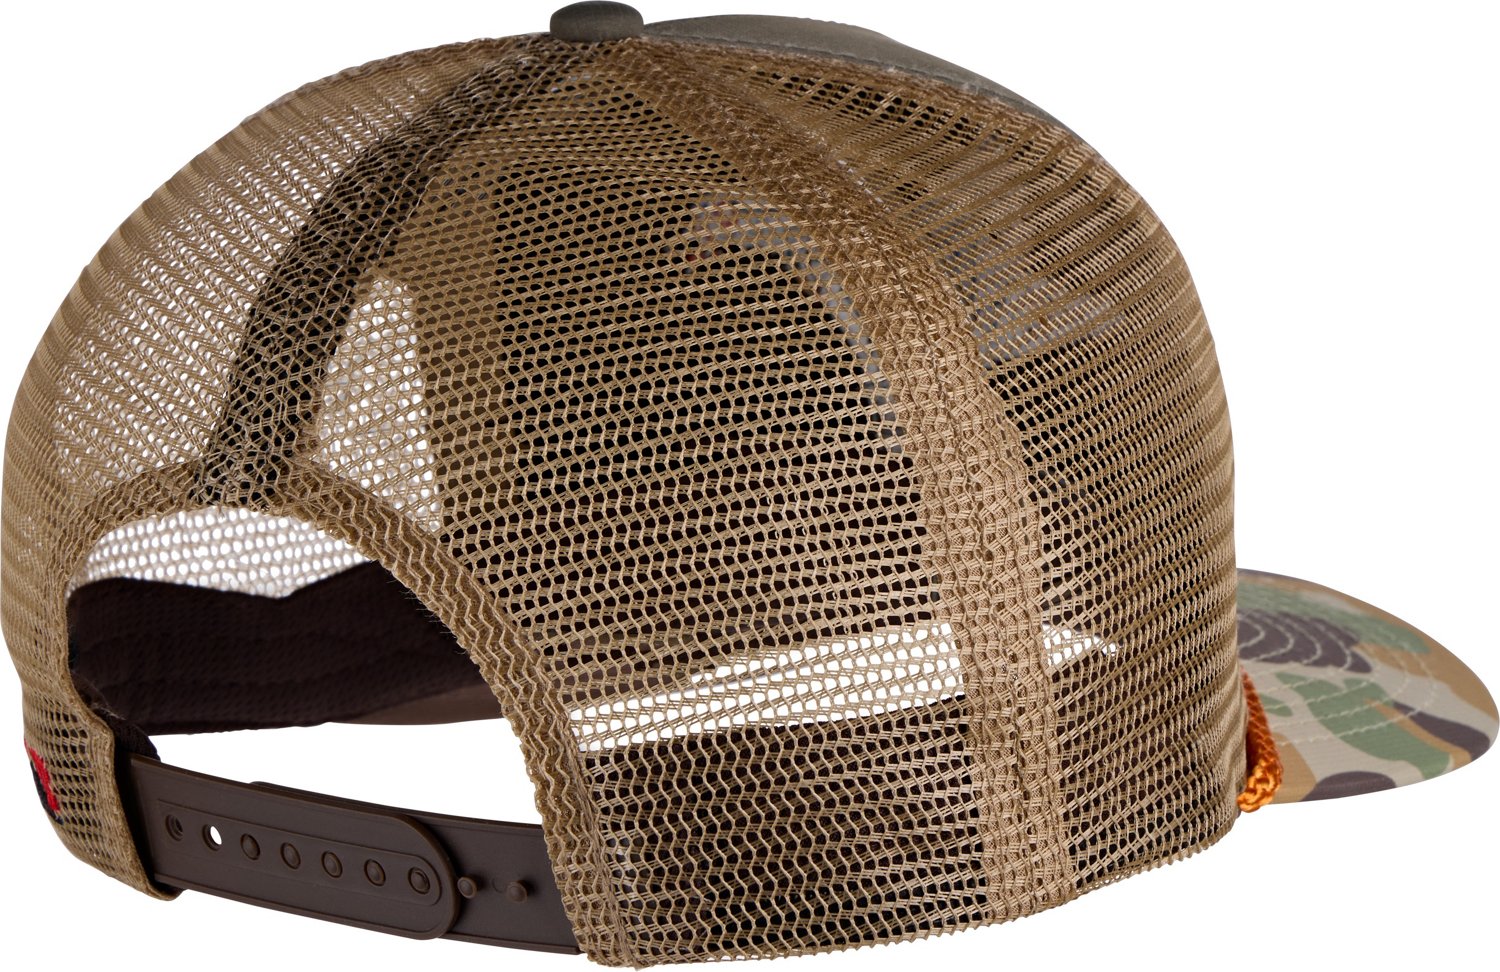 Paramount Outdoors Wood Duck Hat